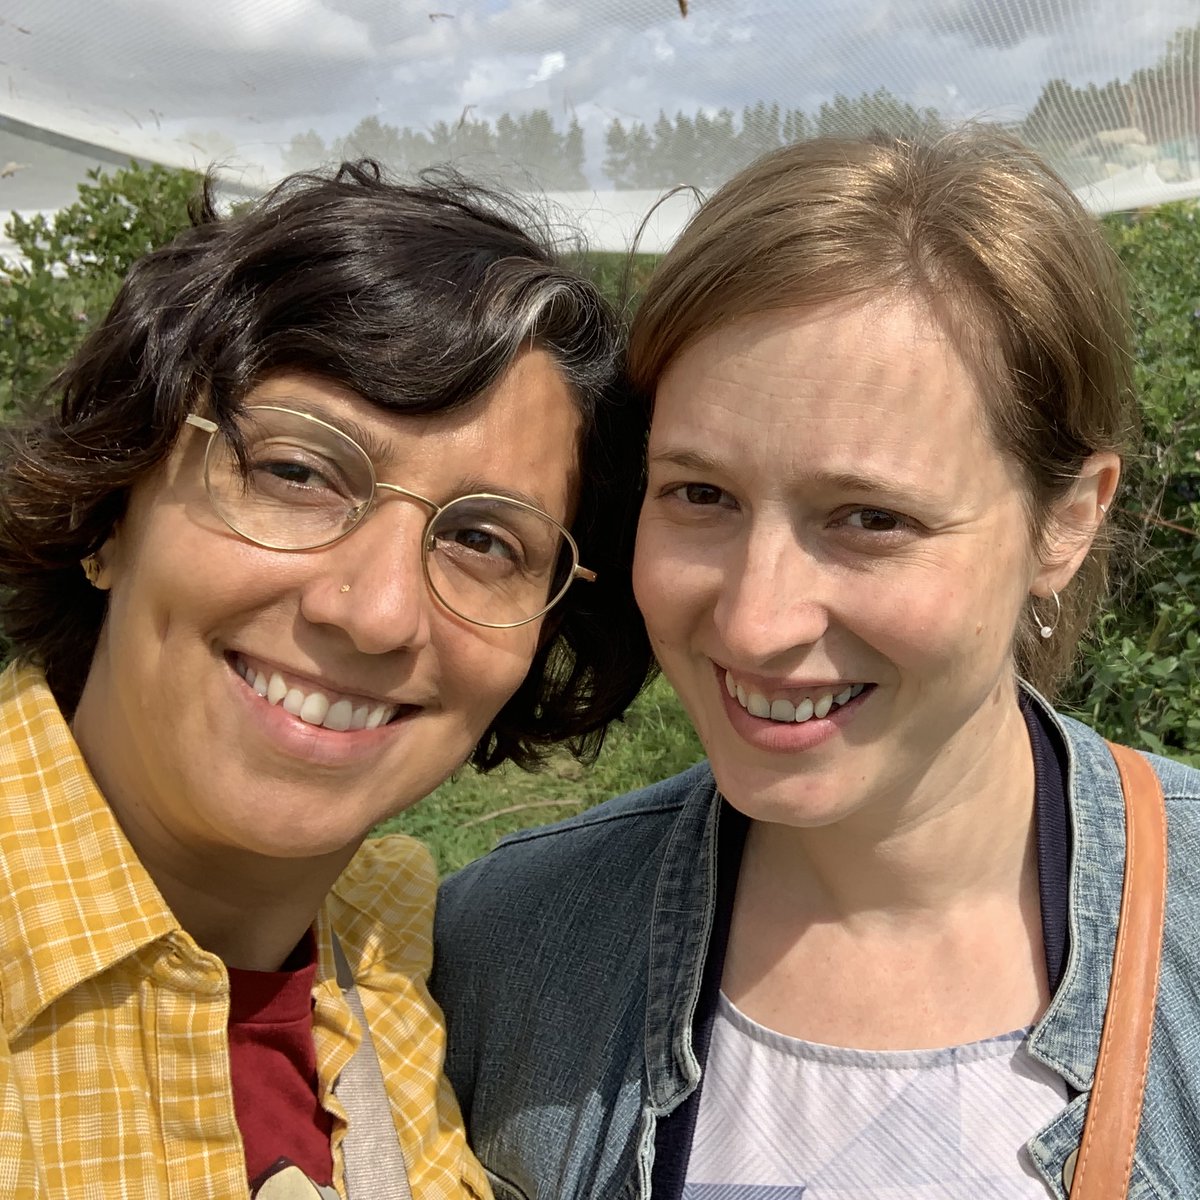 Nadia wanted the end of her life to be marked with a celebration of everything she brought to the world, rather than a mourning of what we have lost. Here are @DrNadiaChaudhri and I picking blueberries together. I invite you to share your own thoughts and memories. 4/n